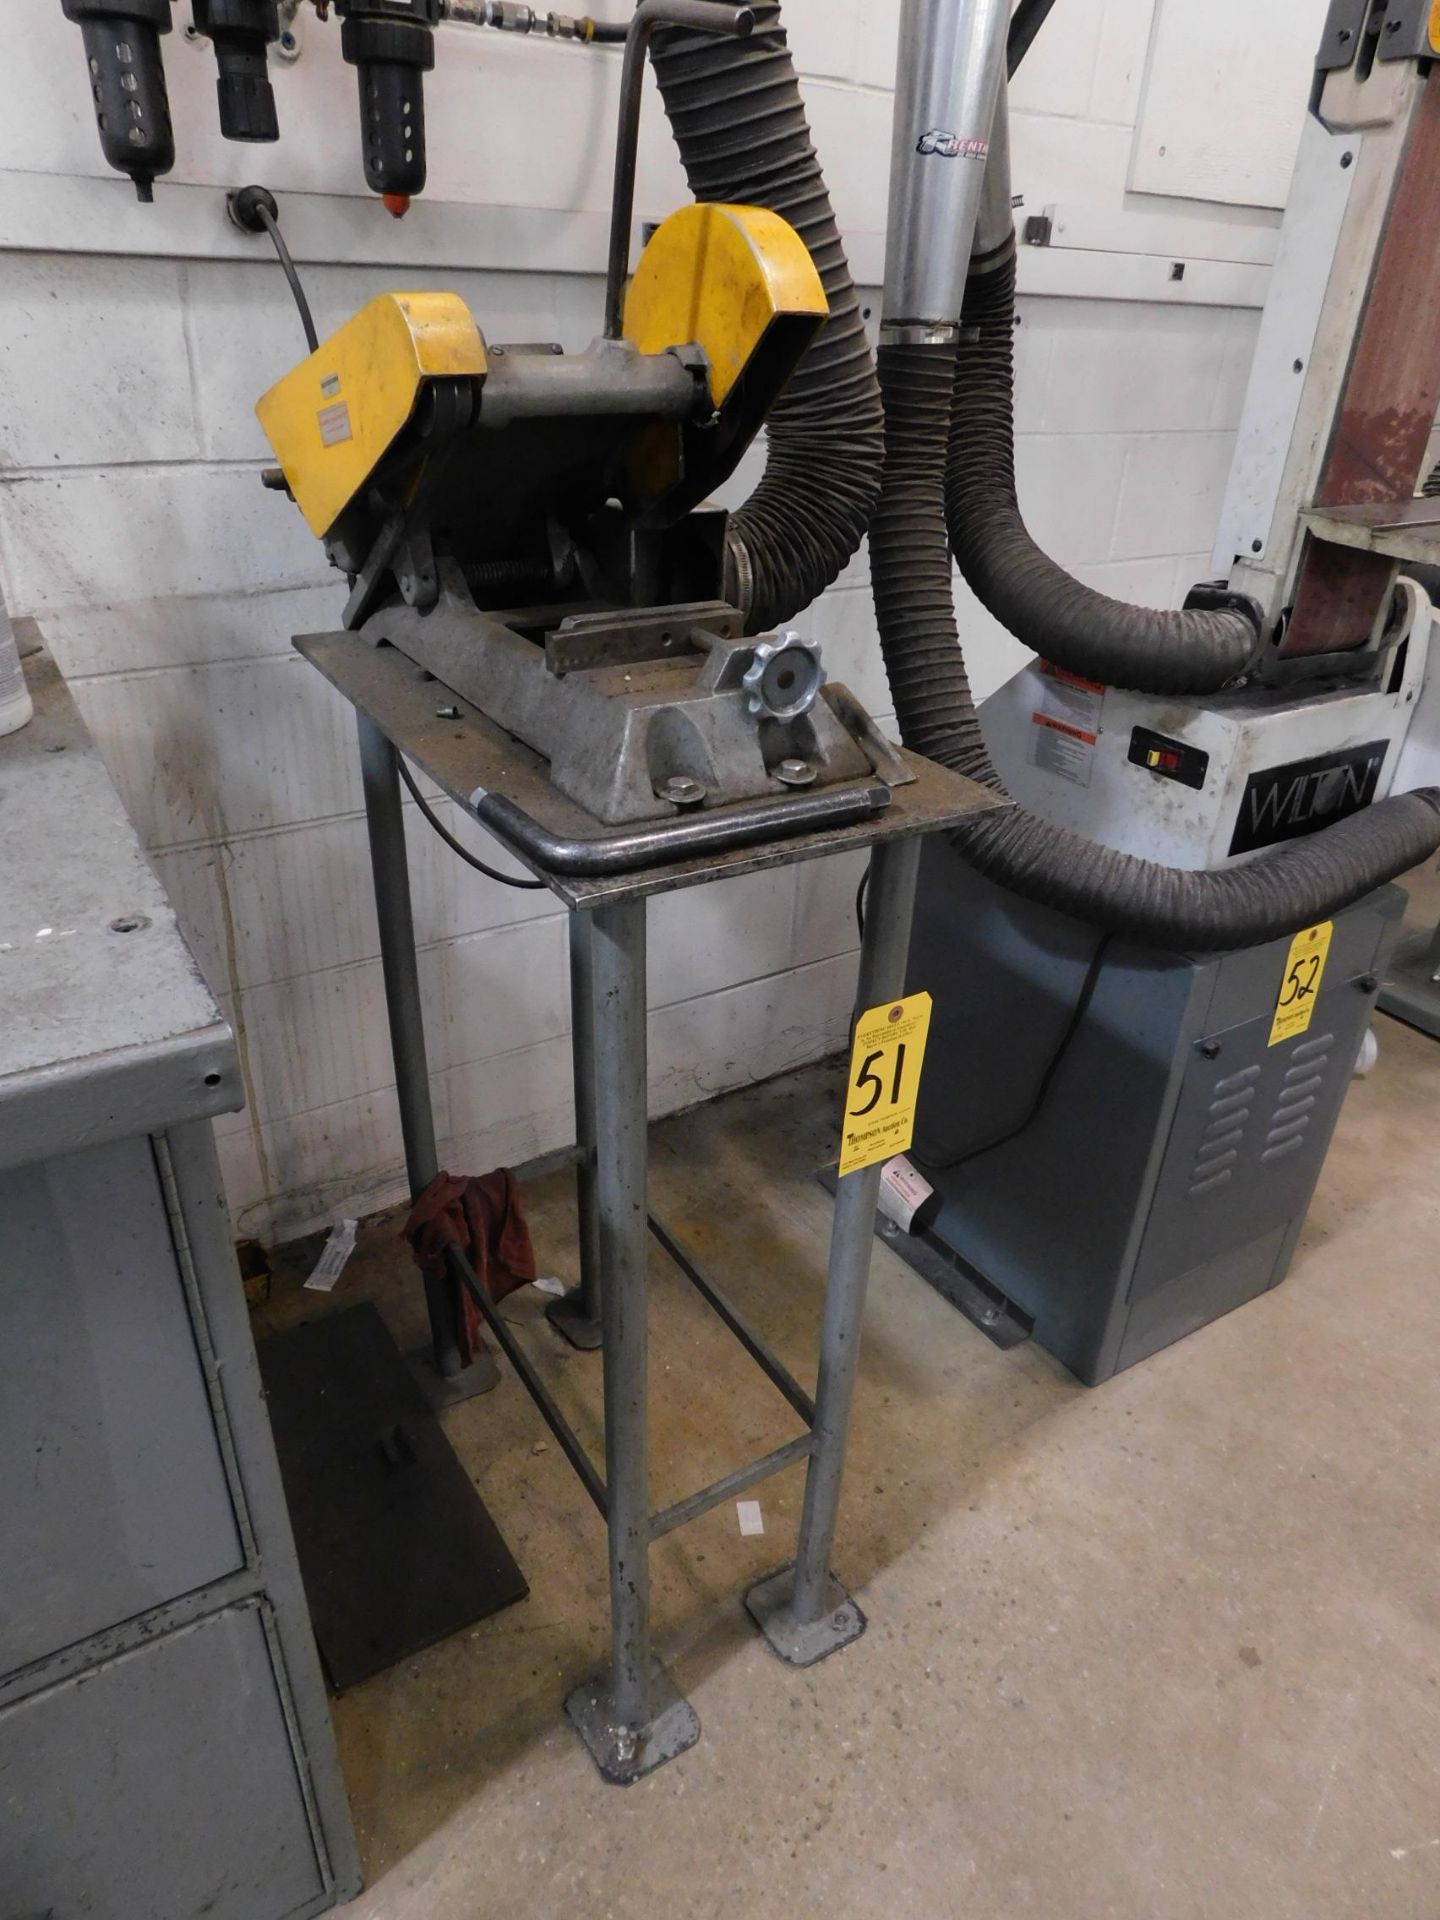 Kalamazoo 8" Abrasive Cut-Off Saw with Stand, 1 HP, 115V, 1 phs.